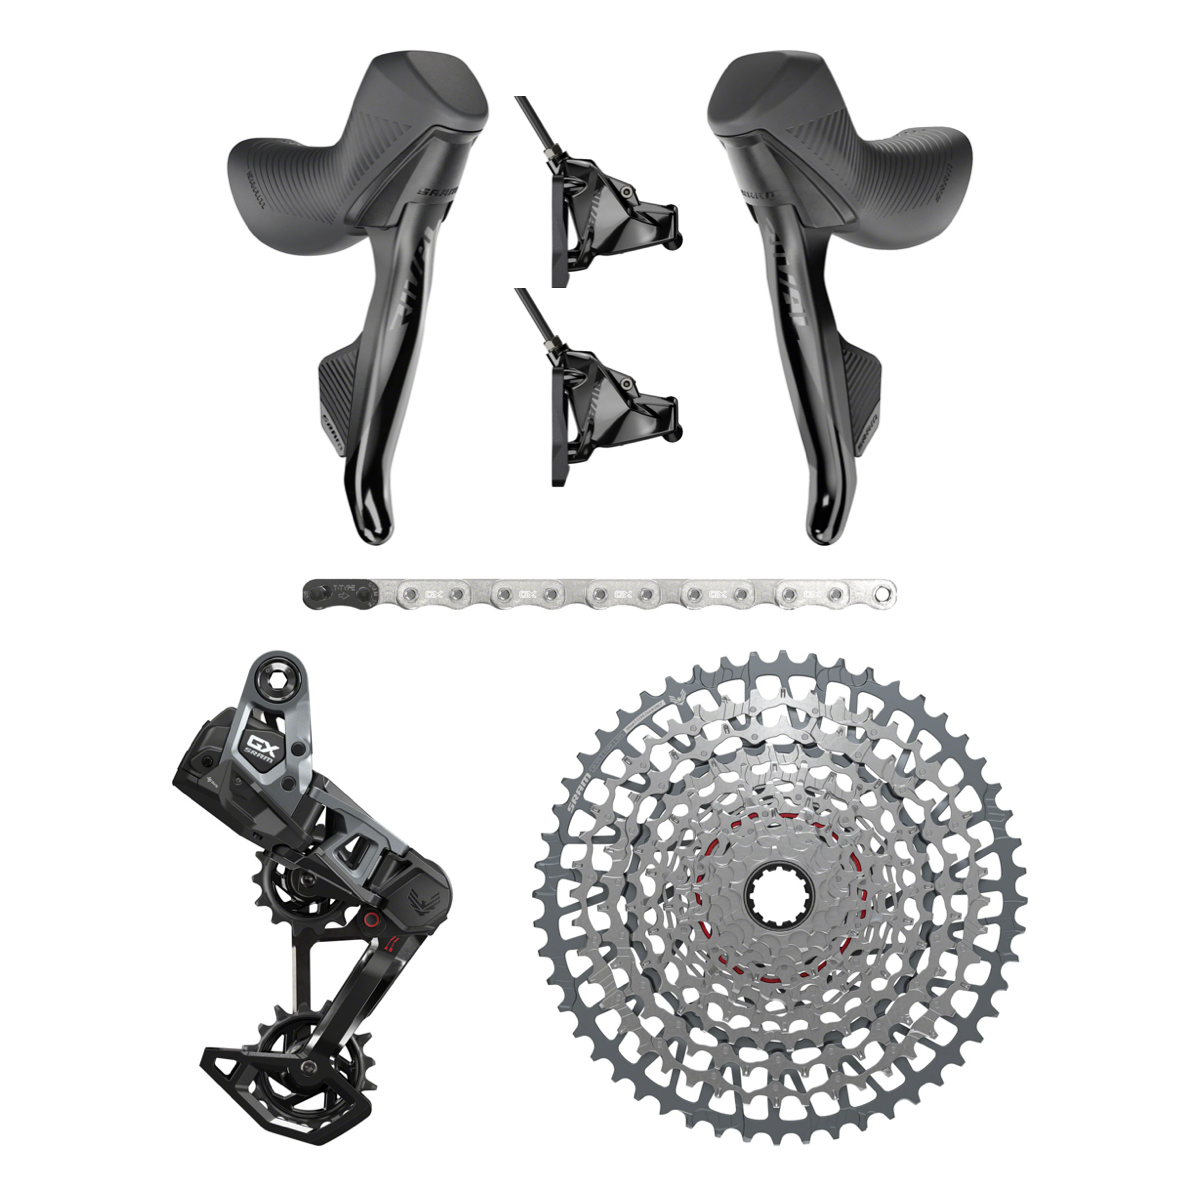 NEW SRAM Rival Eagle T-Type AXS Transmission Mullet Groupset Kit, UDH ONLY